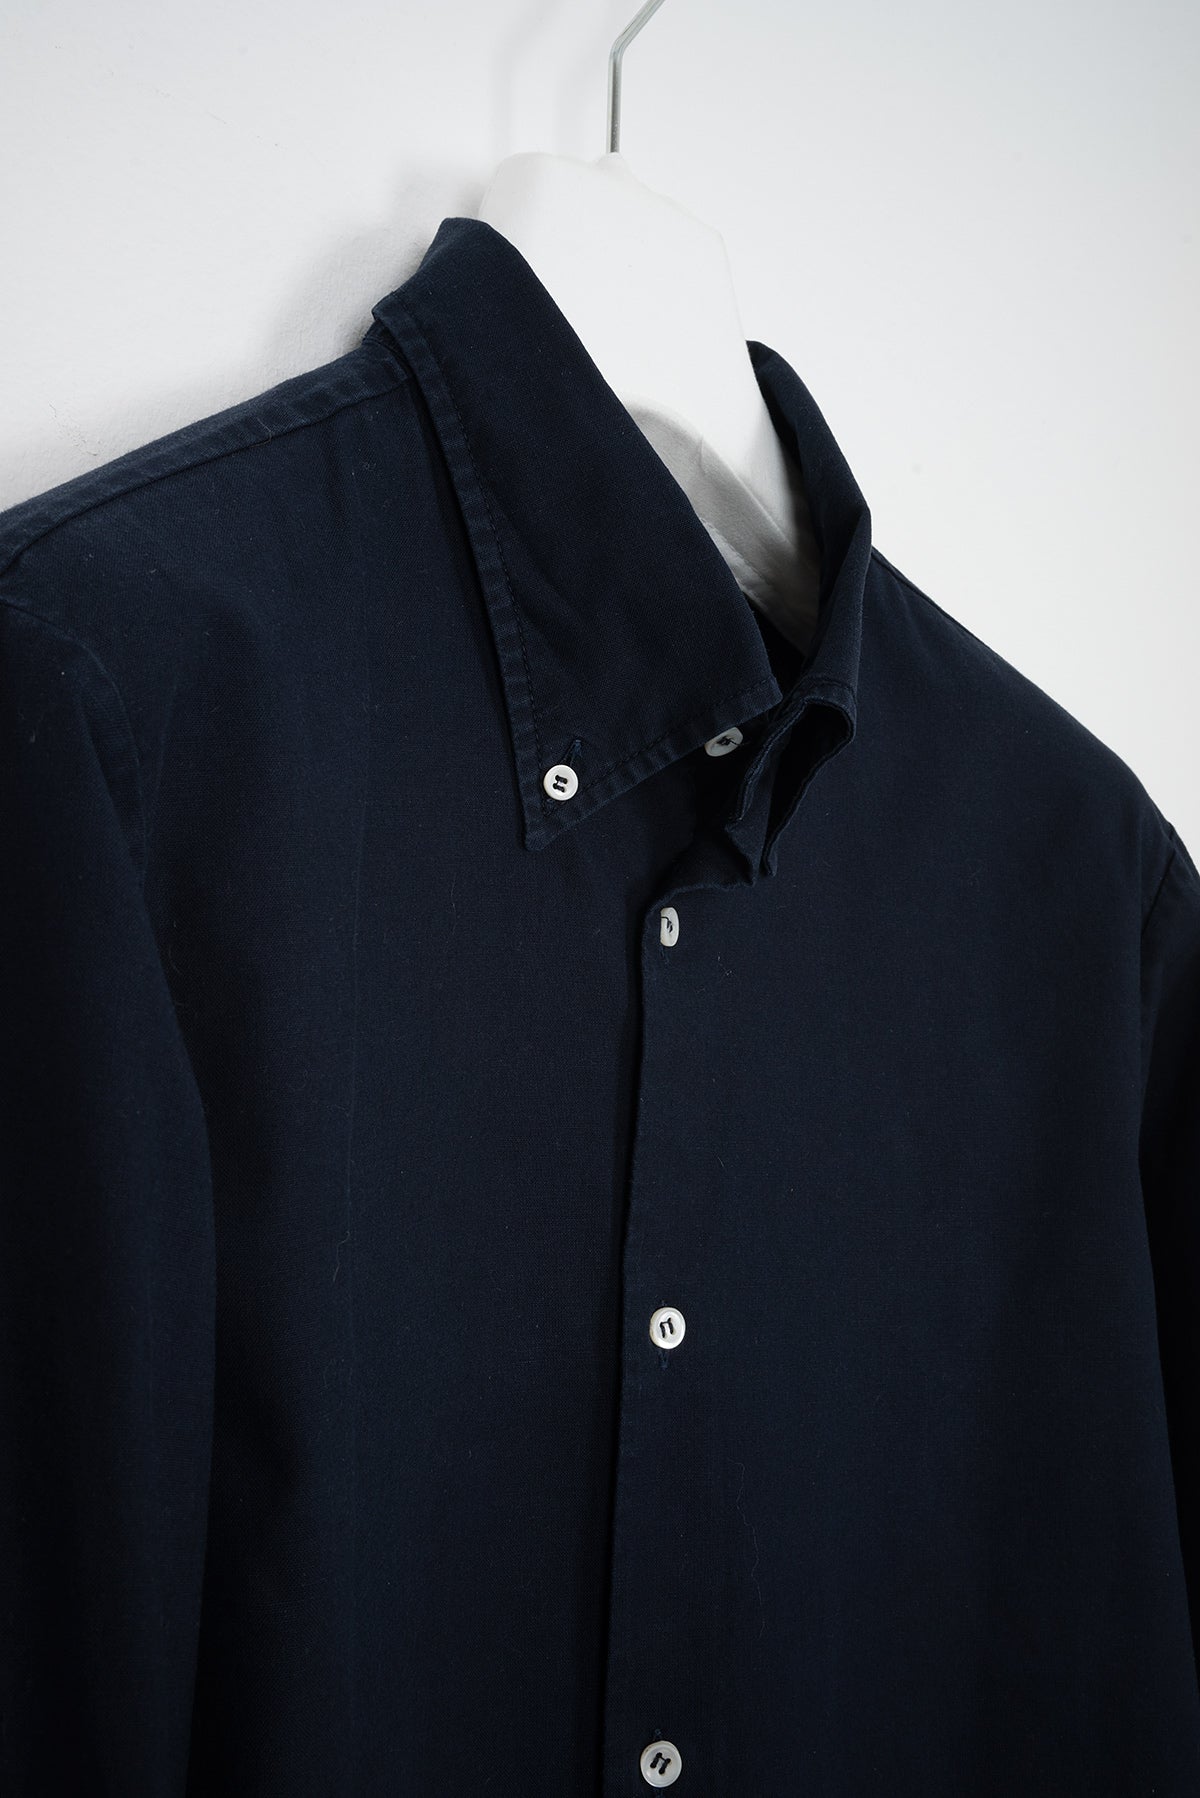 2004 S/S BUTTON-DOWN COLLAR CLASSIC SHIRT IN NAVY BLUE